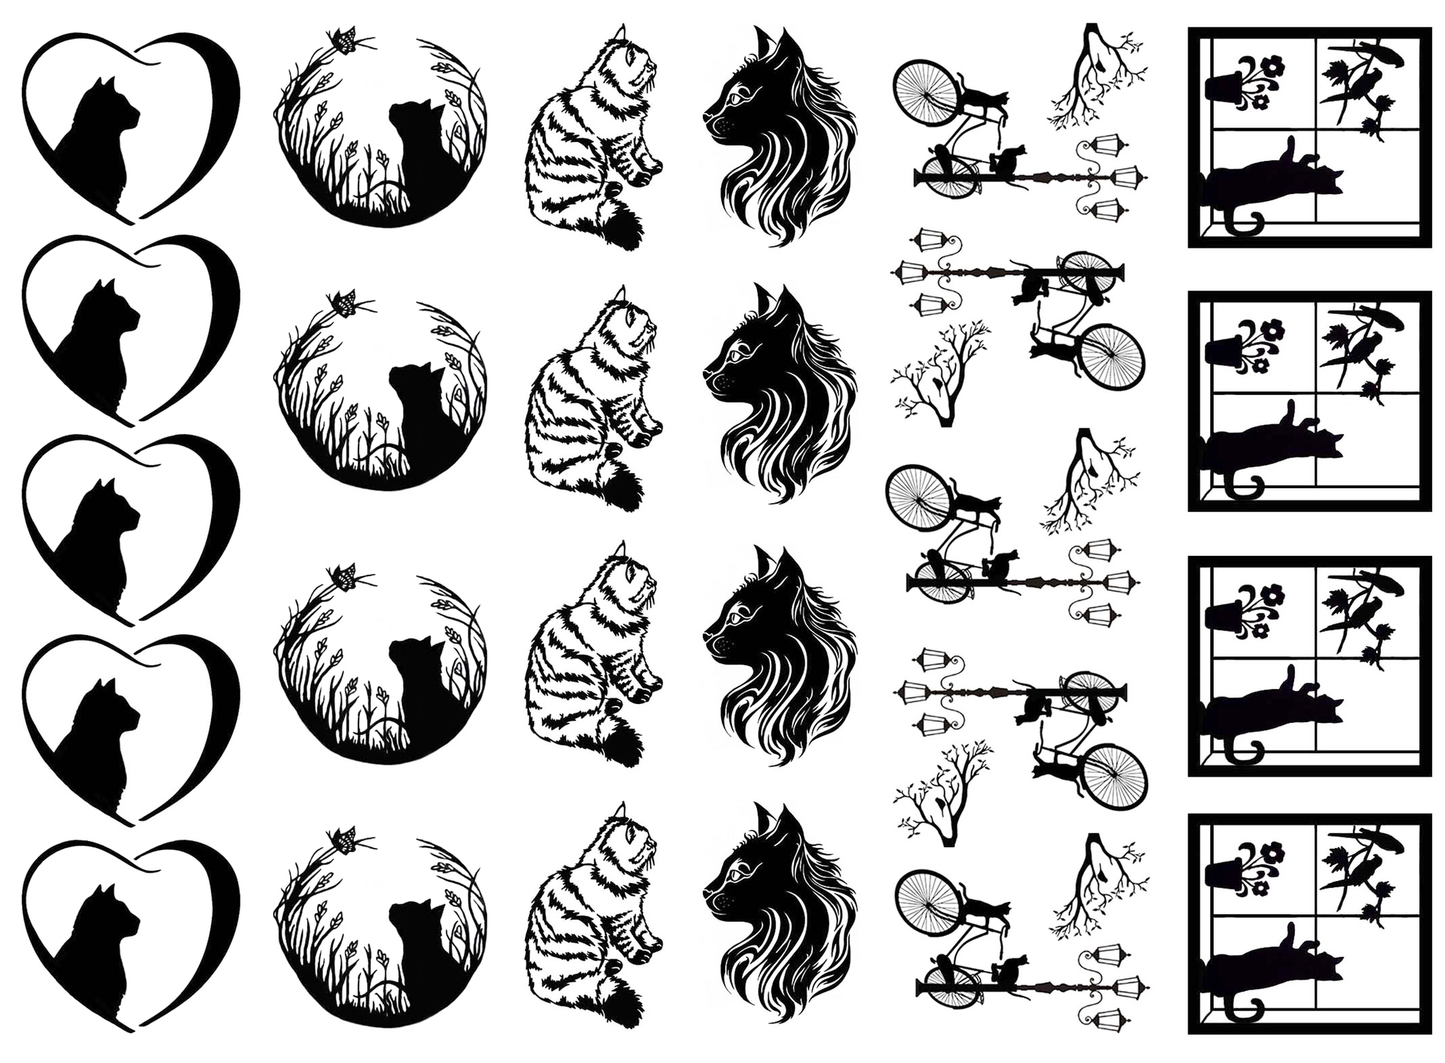 Cat Lovers 26 pcs 1" to 1-1/4" Black Fused Glass Decals